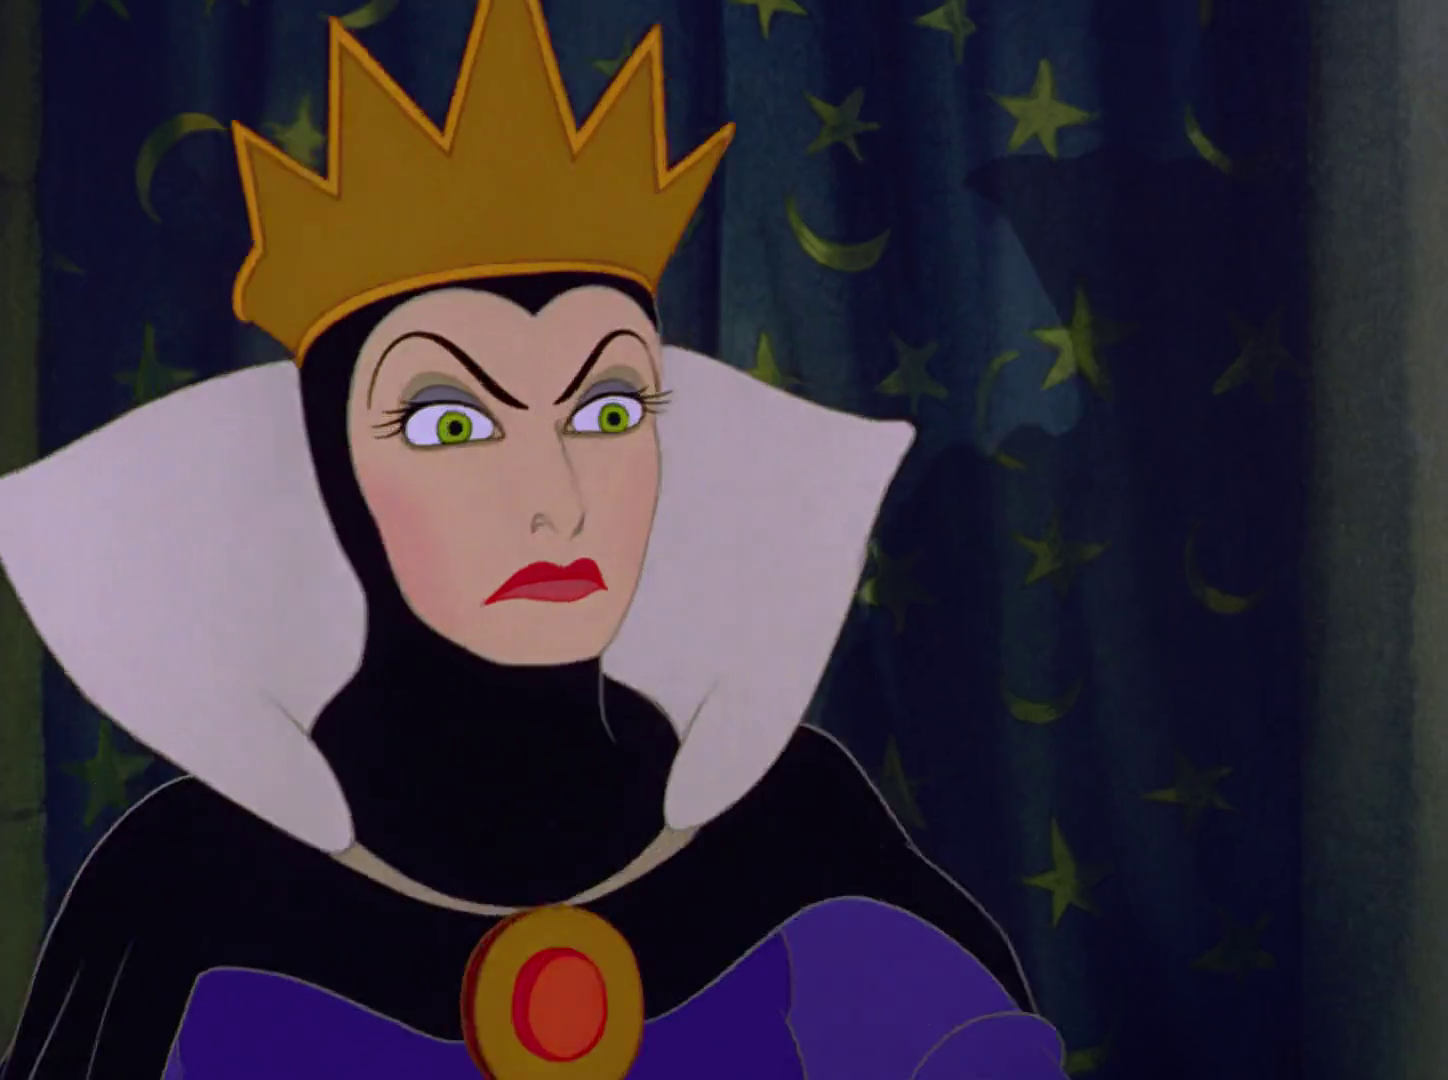 Evil Queen from Snow White - wide 4